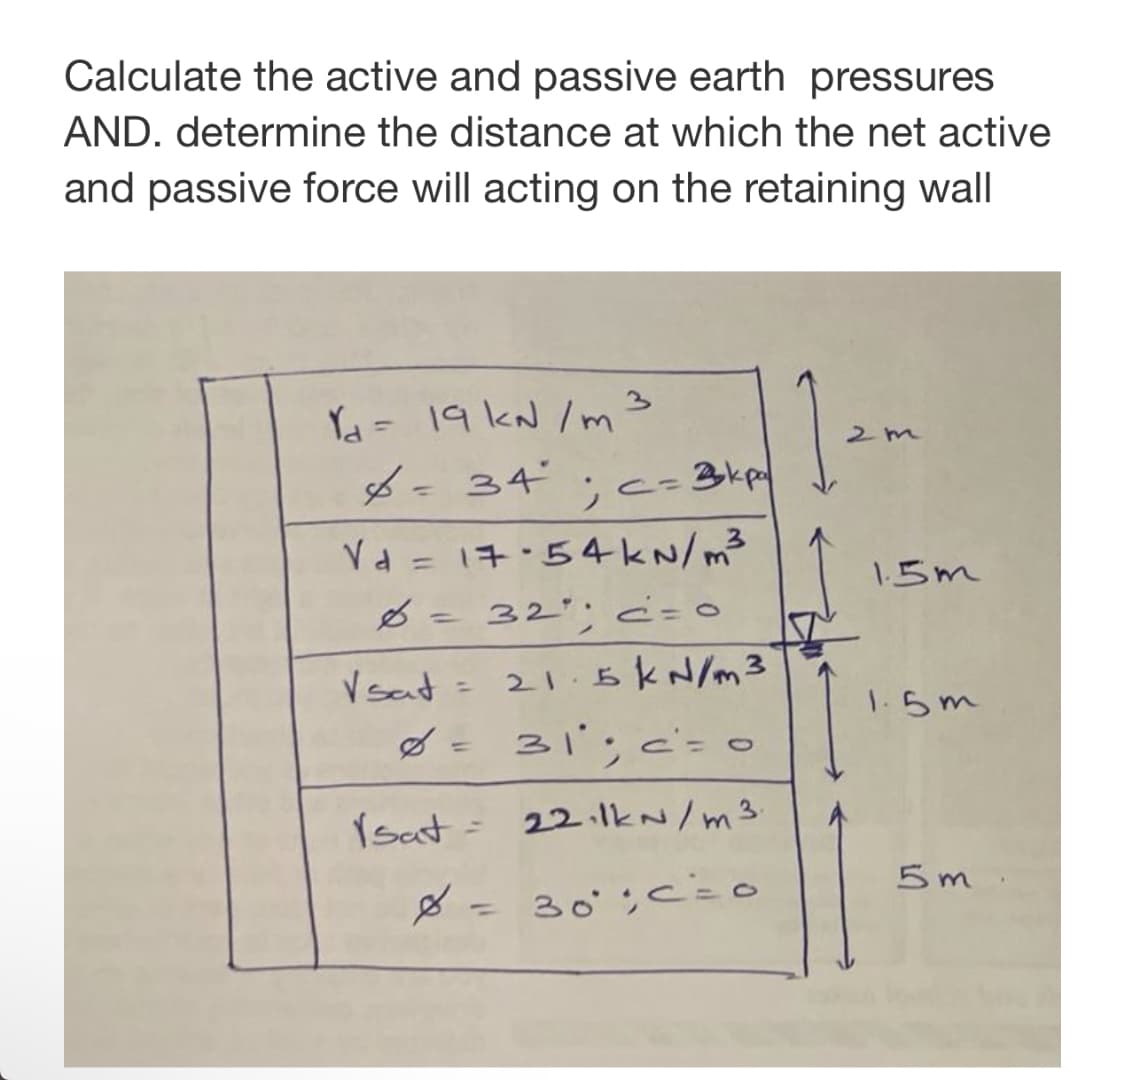 Calculate the active and passive earth pressures
AND. determine the distance at which the net active
and passive force will acting on the retaining wall
Ya=19 kN /m3
- 34 c=3kp
2m
6=34
%3D
Vd = 17.54kN/m3
8=32"; ċ=o
%3D
1.5m
%3D
= 21. BkN/m3
V sat
8= 31; c'= o
%3D
1.5m
%3D
Ysat = 22.lkN/m3
5 m
8=30;cio
